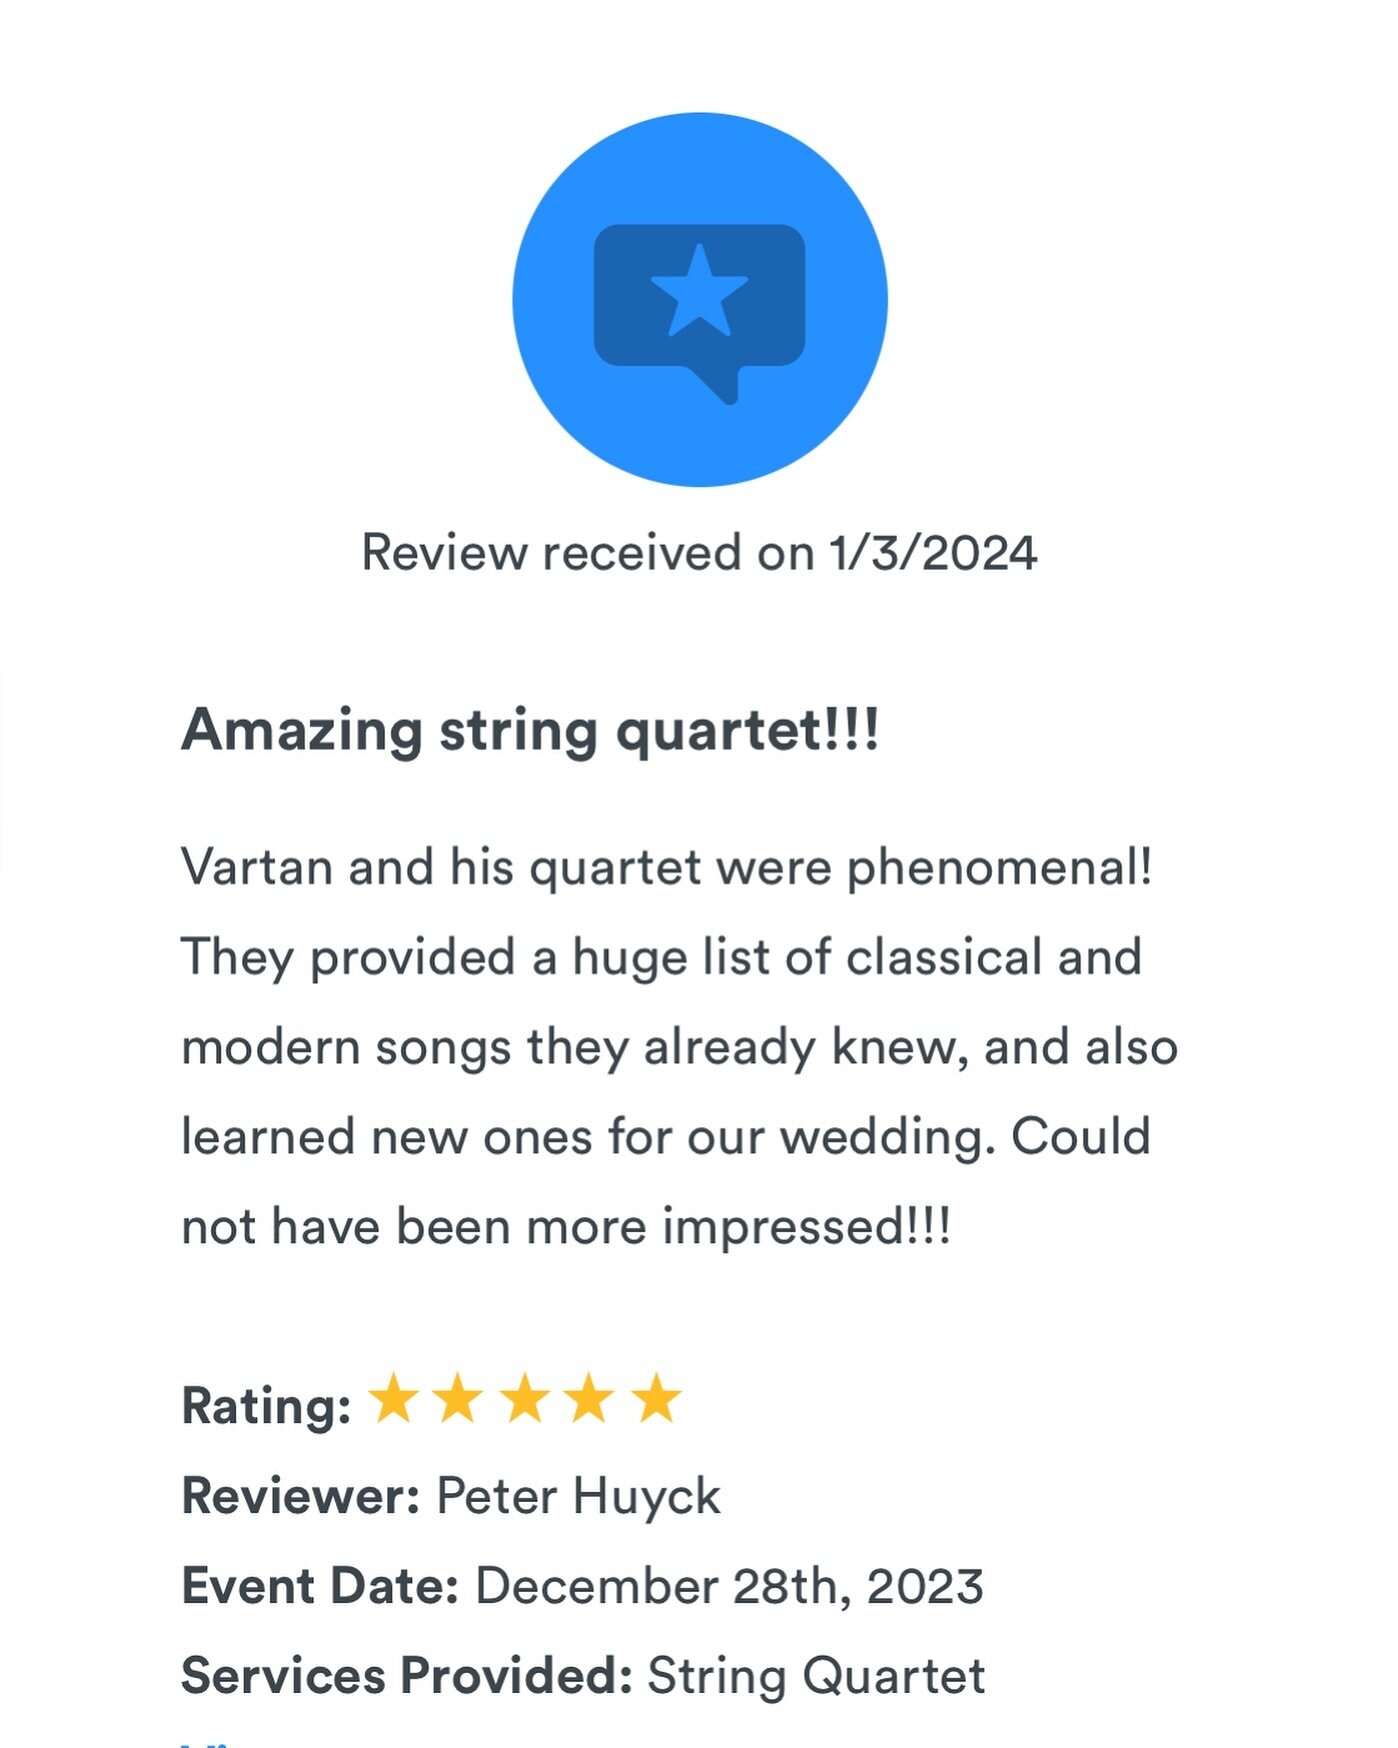 Nothing&rsquo;s better than making our clients happy 🥰✨🎶 
&lsquo;
#nycweddingplanner #nycweddings #nycmusicians #nycmusician #review